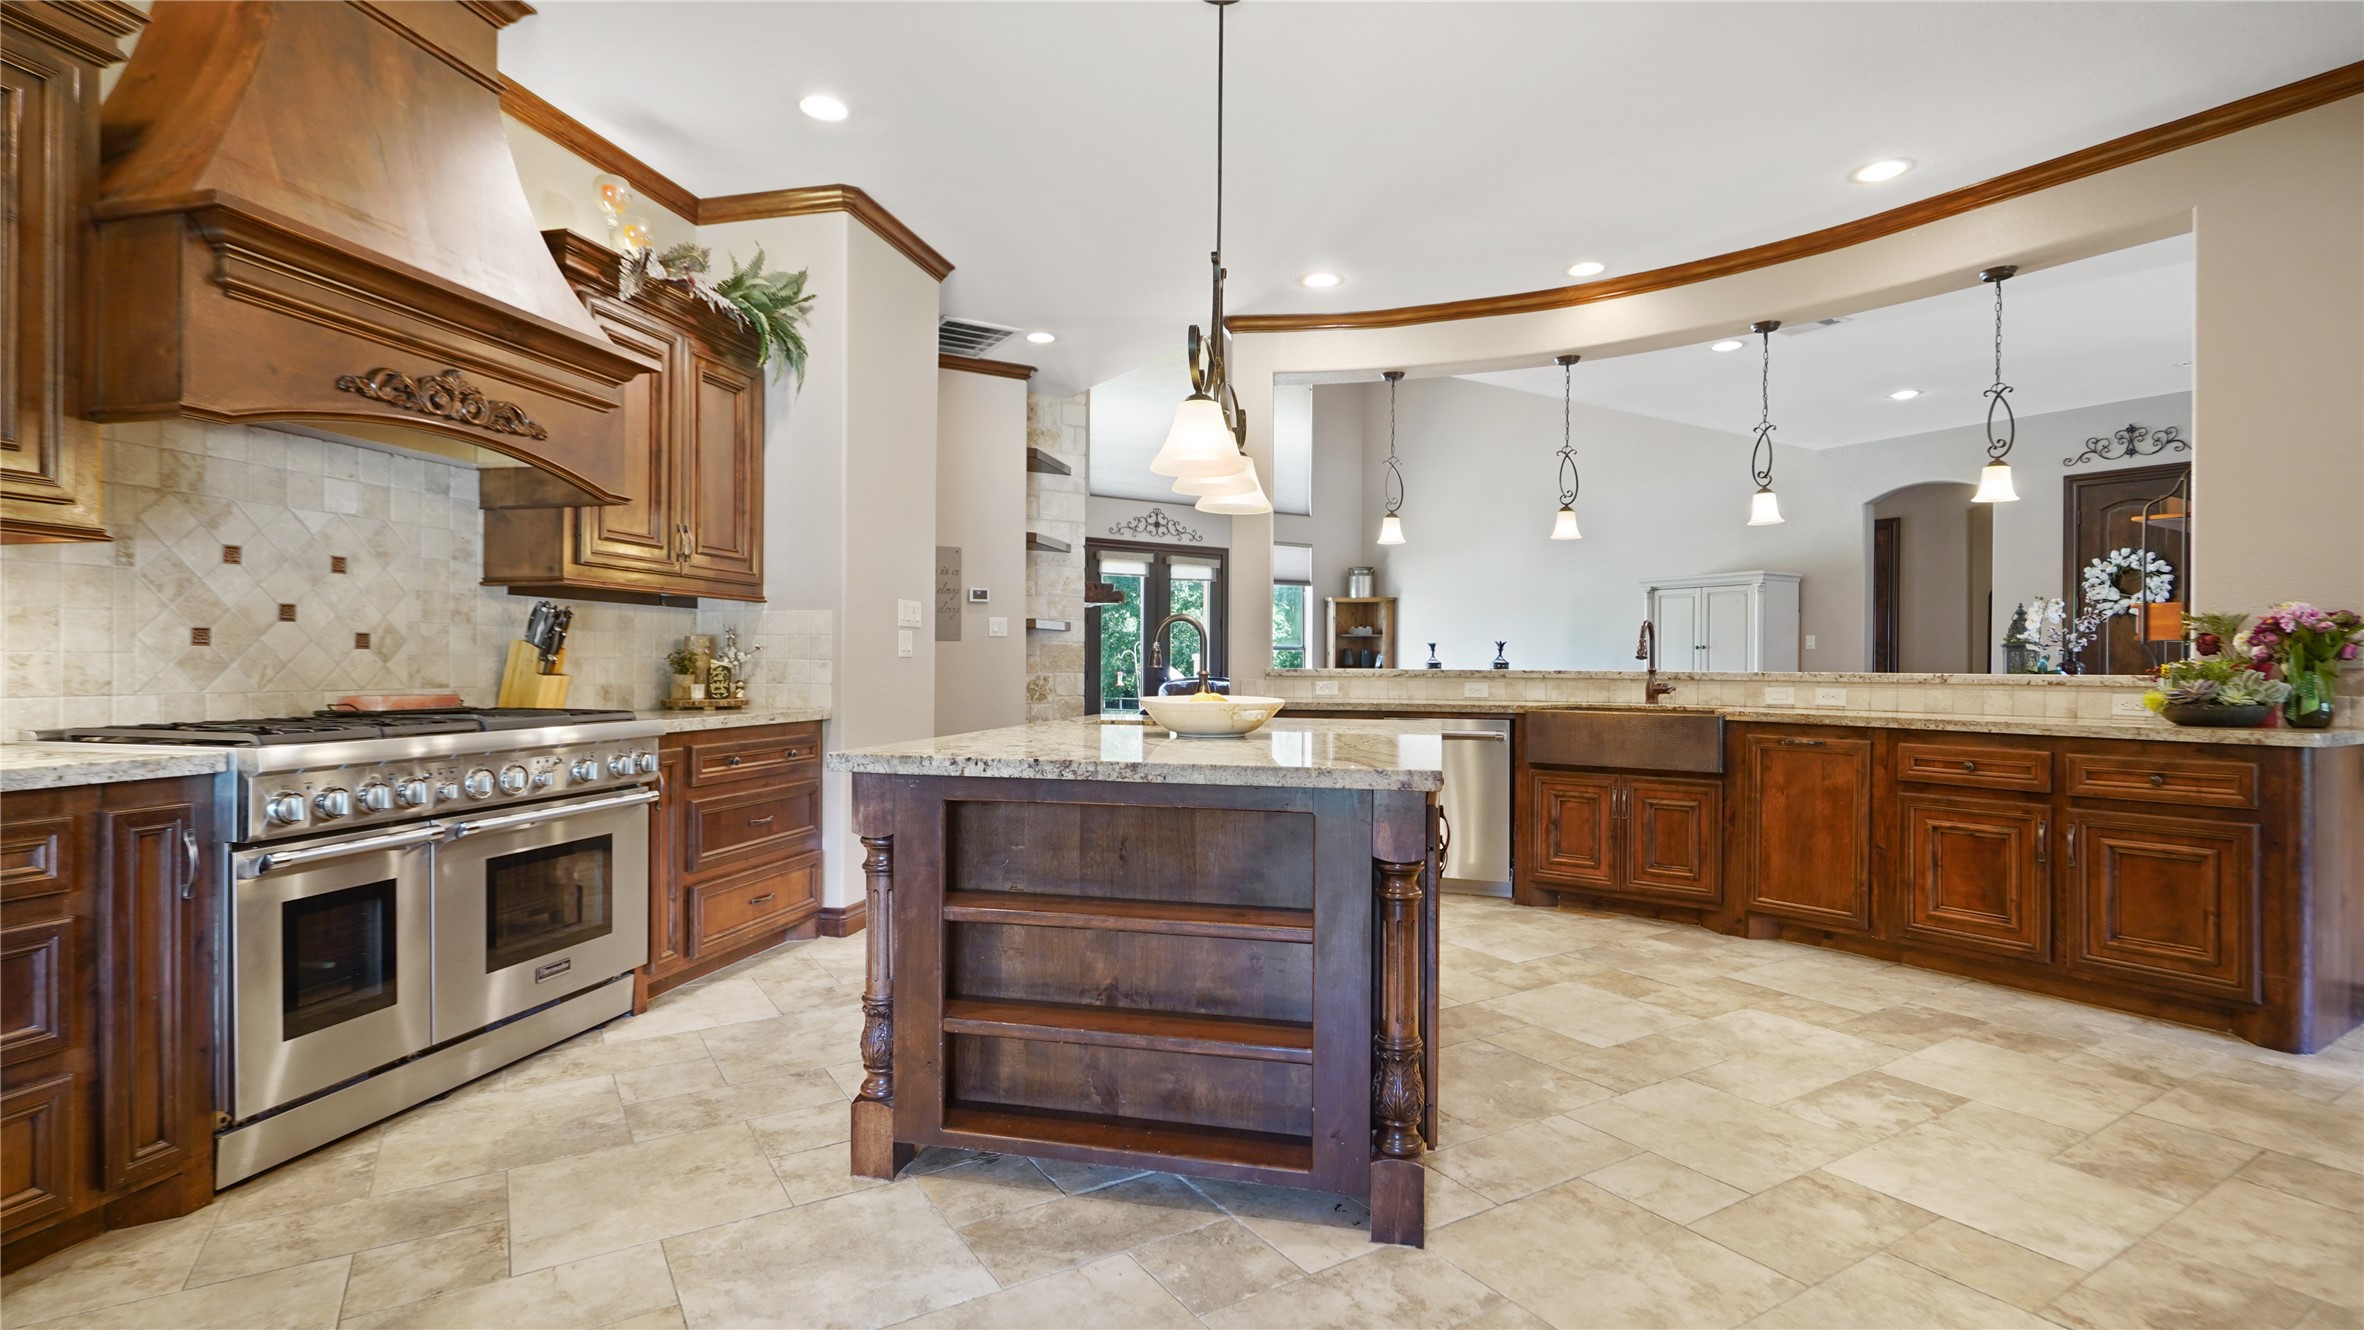 gourmet kitchen is a culinary masterpiece, adorned with luxurious granite countertops, top-of-the-line Thermidor appliances, a built-in fridge, and an exquisite copper sink.